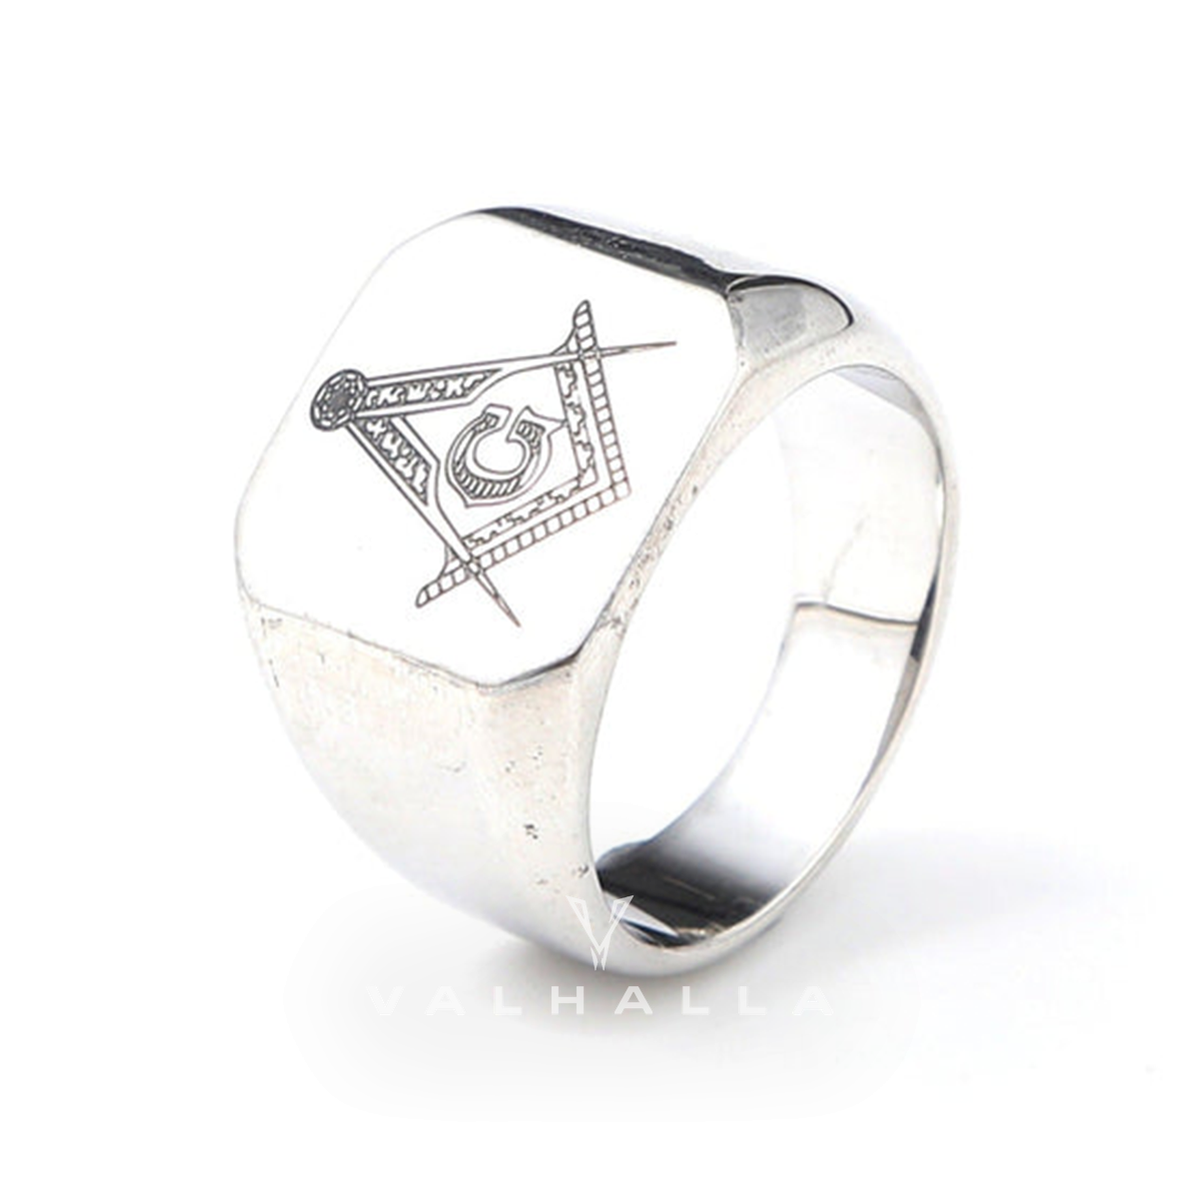 Ag Polished Stainless Steel Masonic Ring